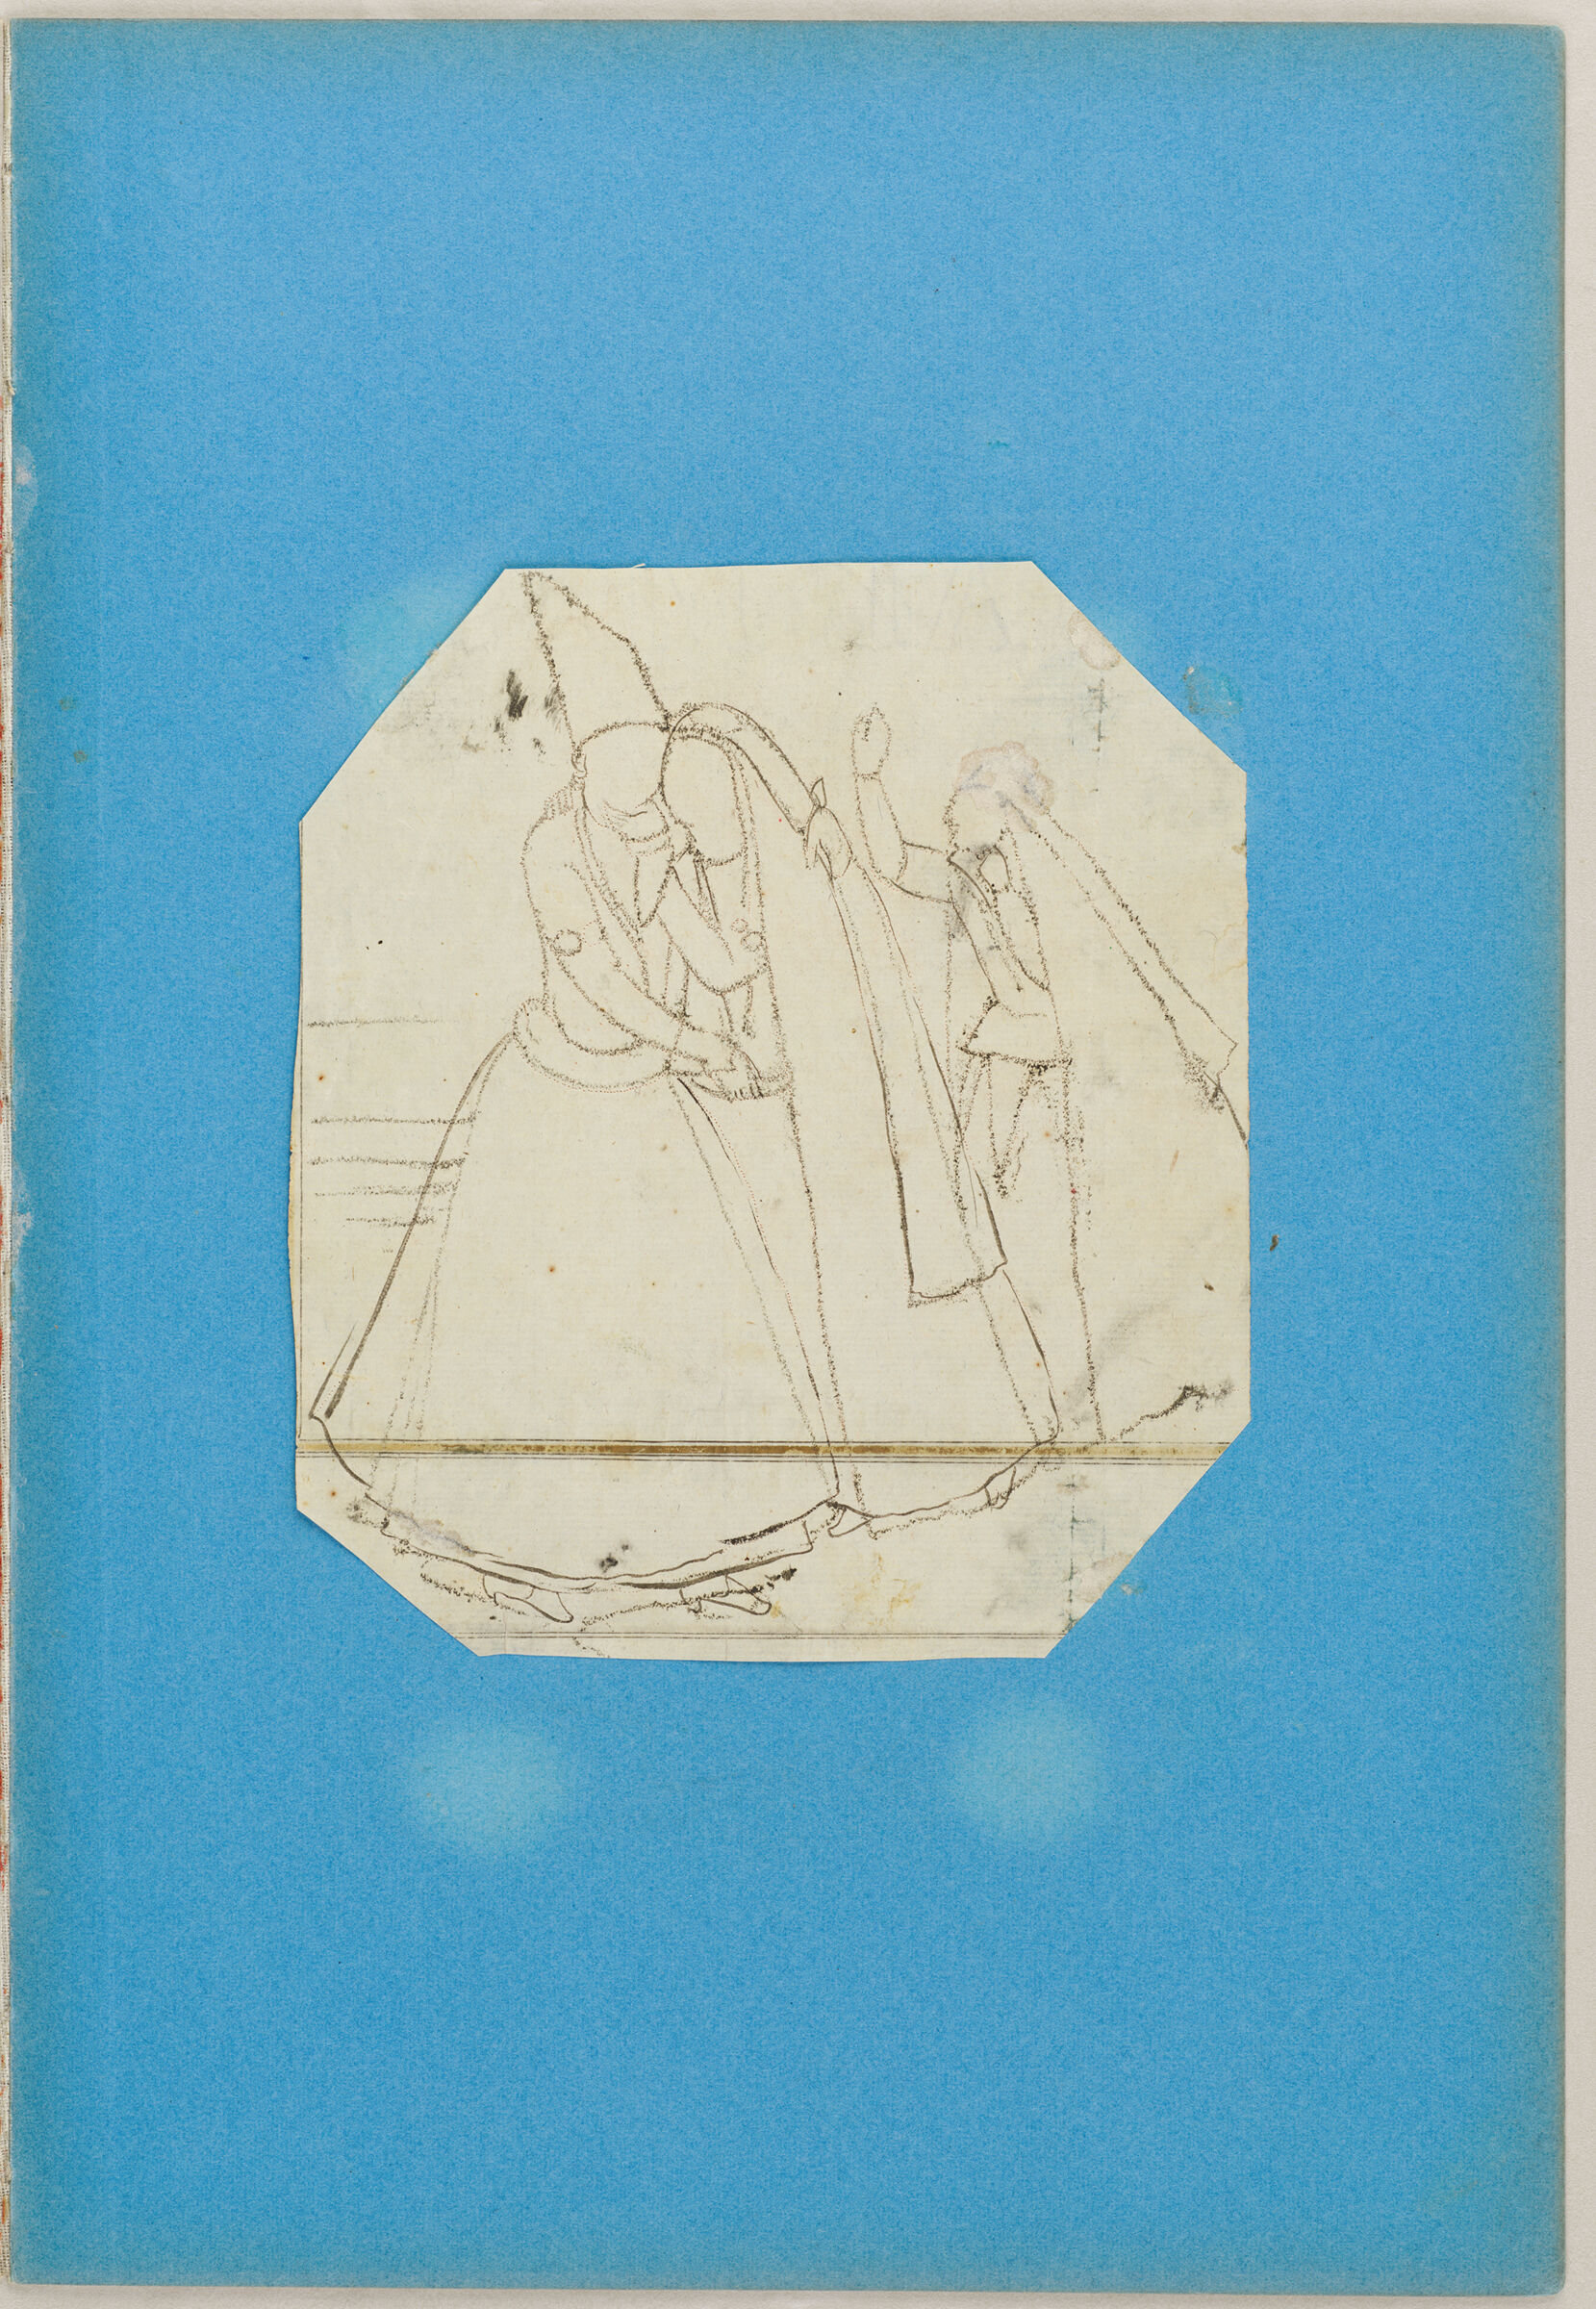 Folio 4 From An Album Of Drawings And Paintings: Dancer With Finger-Cymbals (Recto); Embracing Couple Approached By A Woman (Verso)